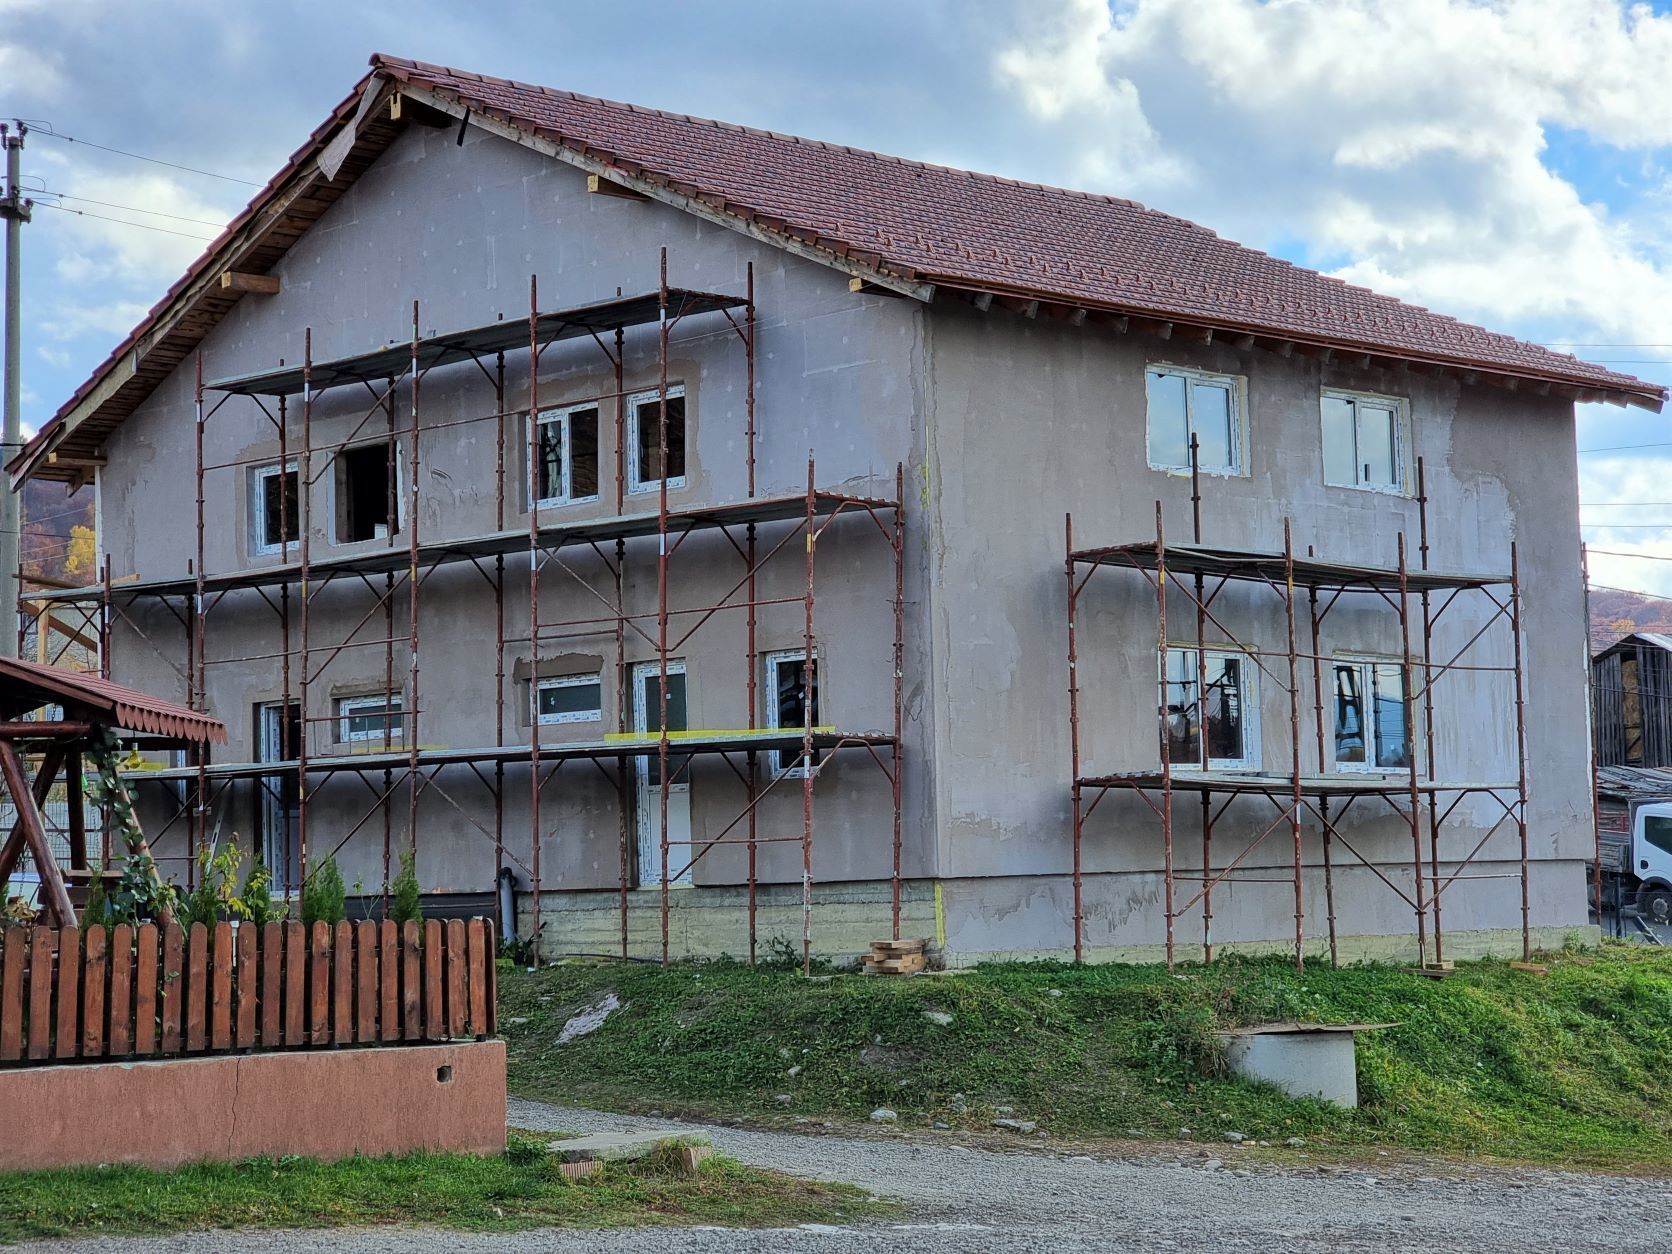 We need your help to complete these Global Village homes in Moinesti, Romania